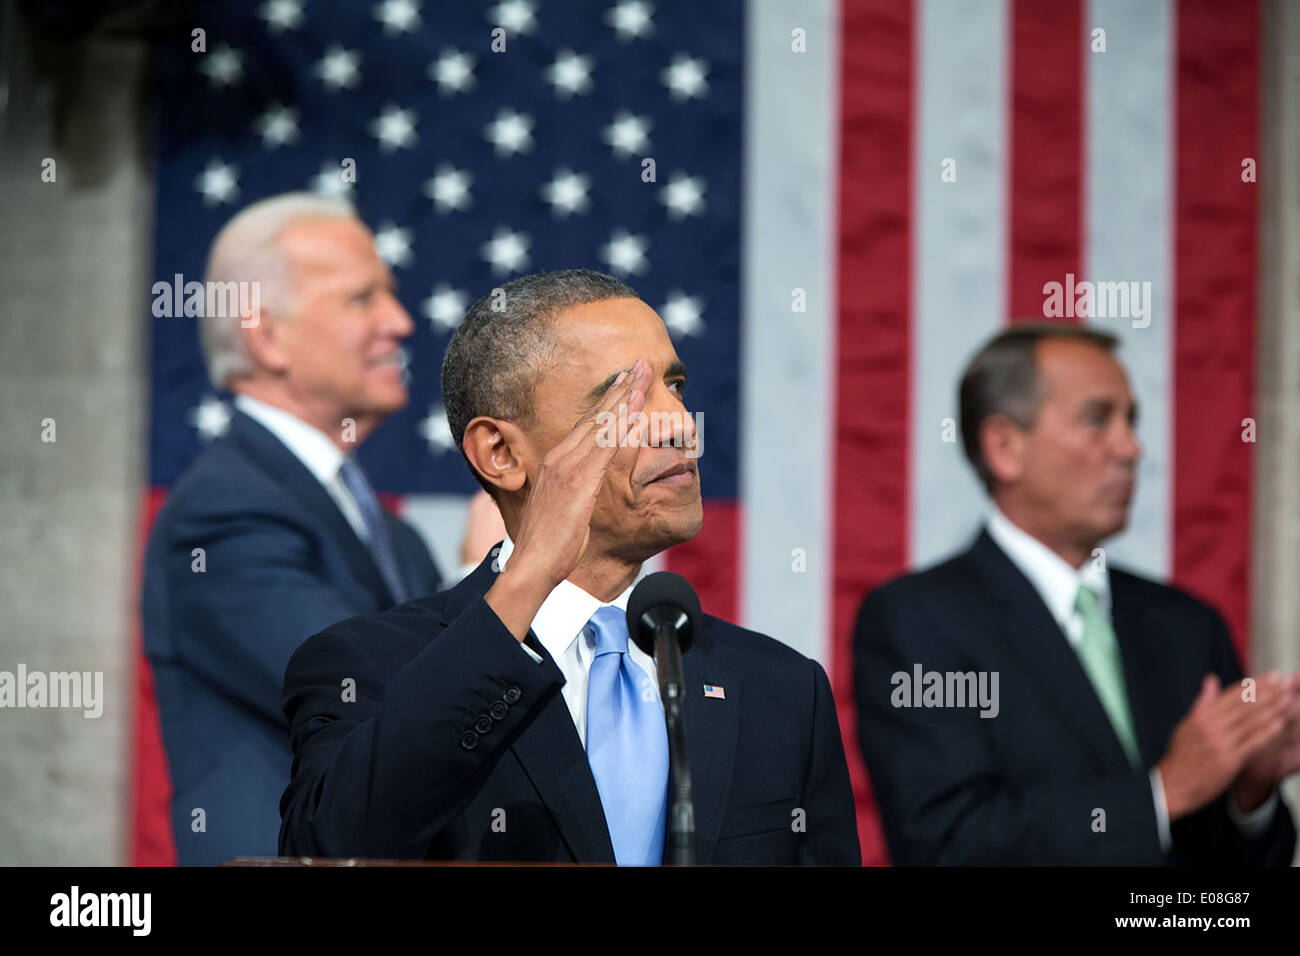 US President Barack Obama acknowledges U.S. Army Ranger Sergeant First Class Cory Remsburg during his State of the Union address in the House Chamber at the U.S. Capitol January 28, 2014 in Washington, DC. Stock Photo